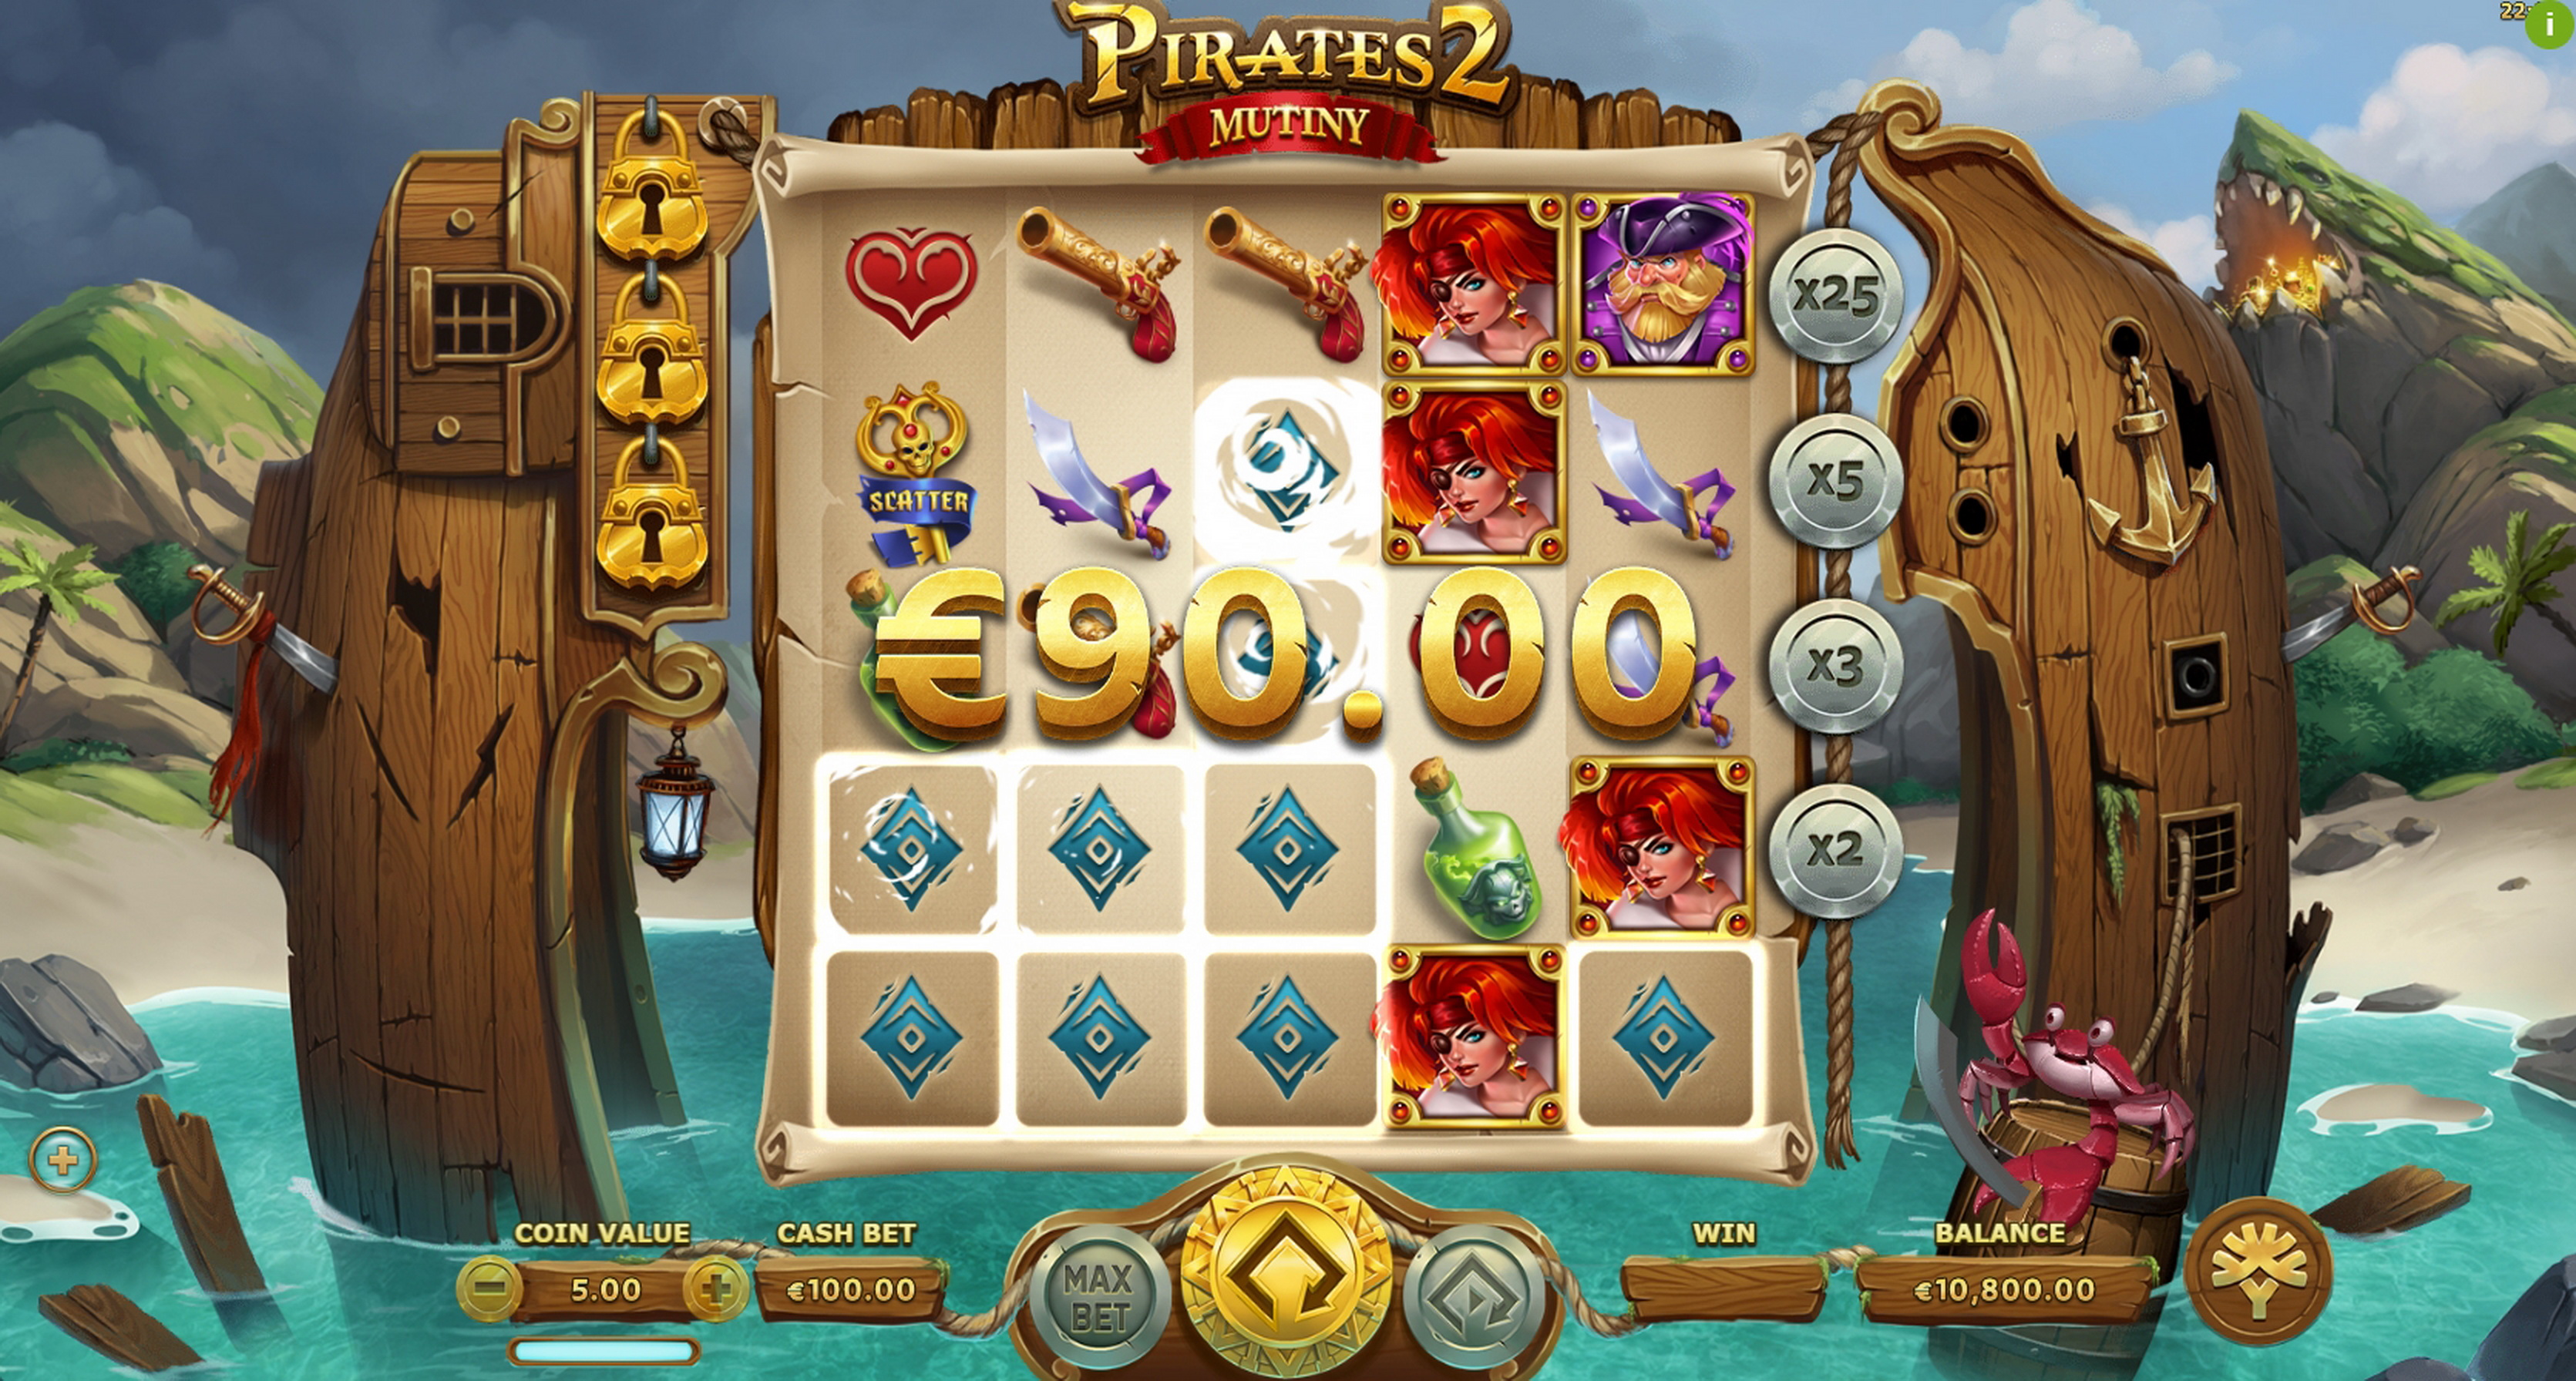 Win Money in Pirates 2: Mutiny Free Slot Game by Yggdrasil Gaming